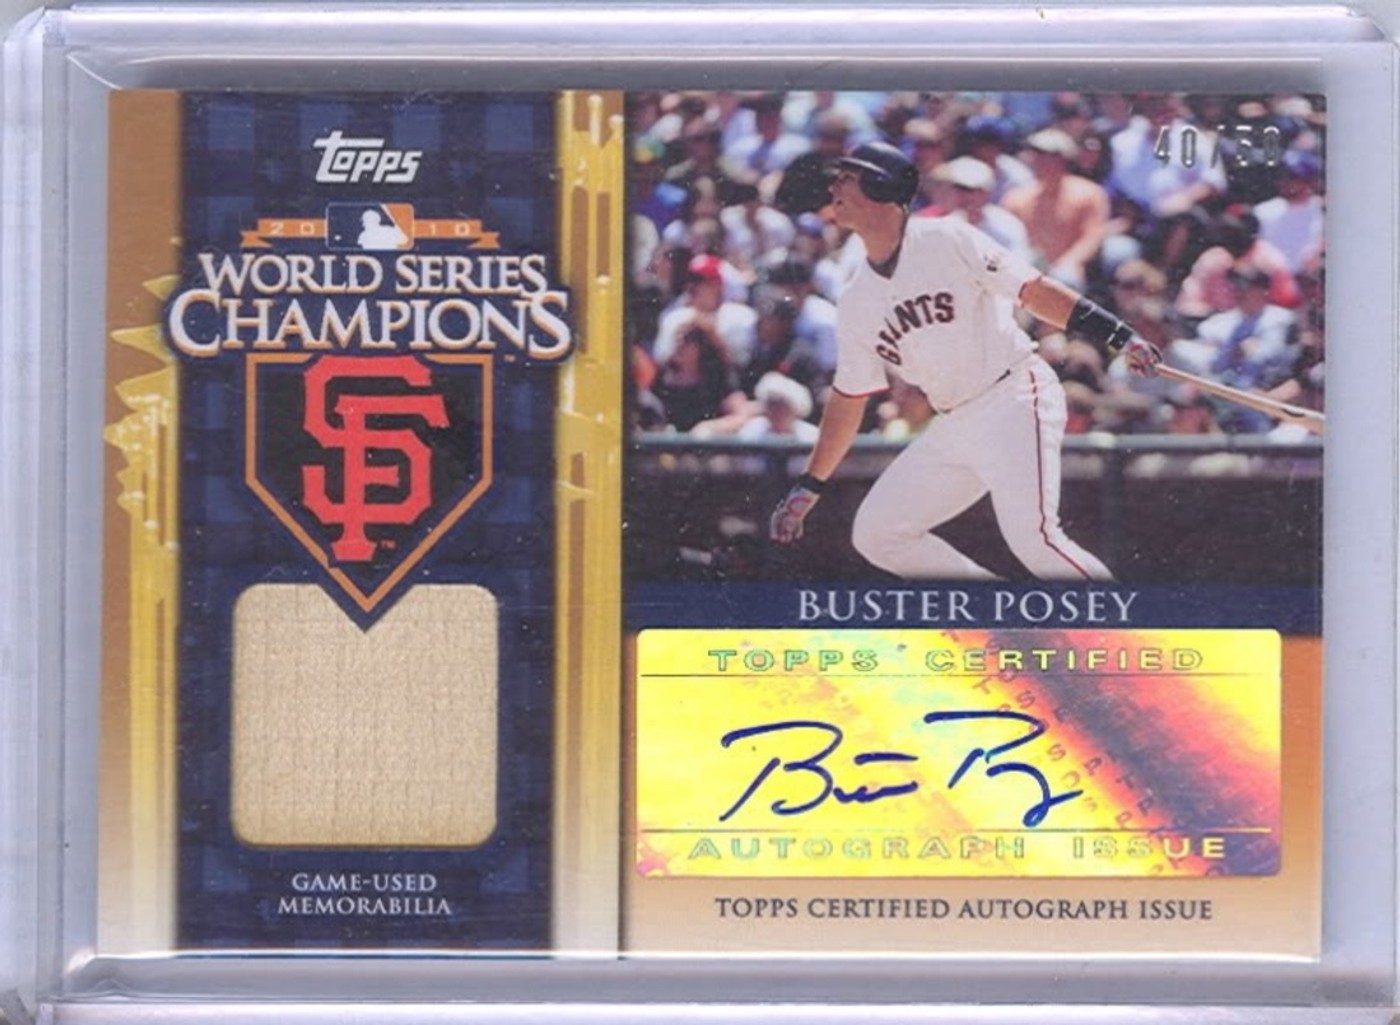 Buster Posey Topps World Series relic autograph card